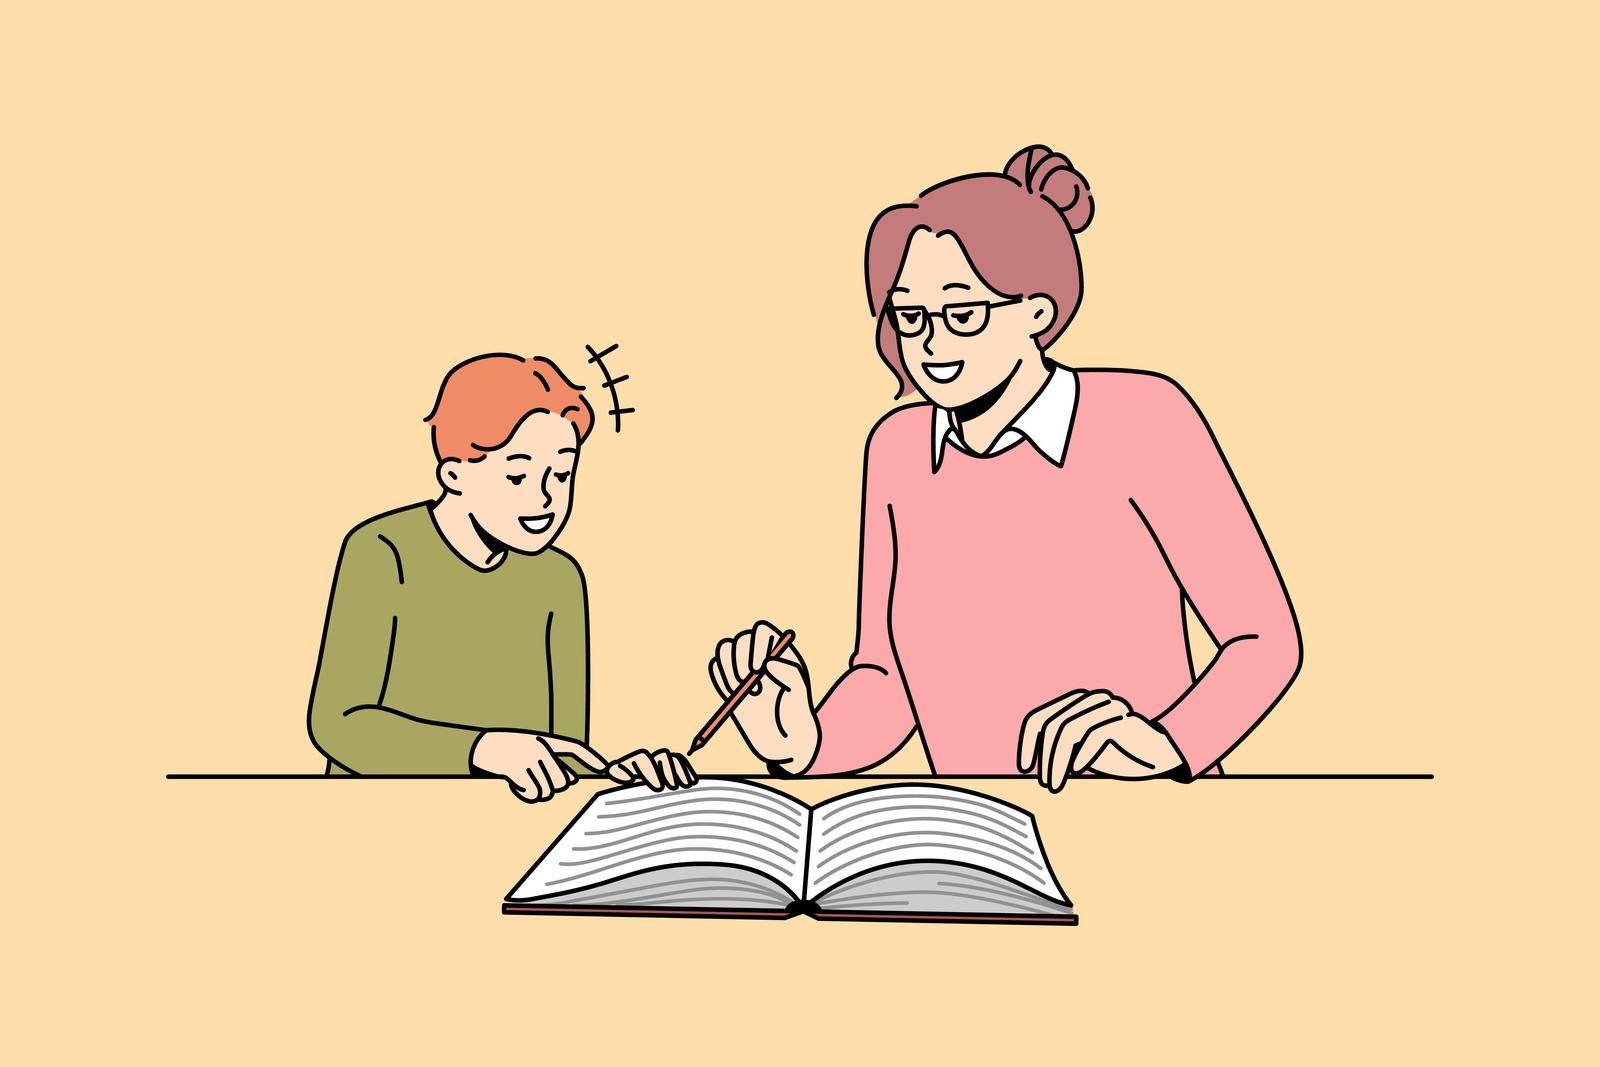 Education teaching and learning concept. Smiling boy pupil and woman teacher sitting and reading book together getting knowledge vector illustration